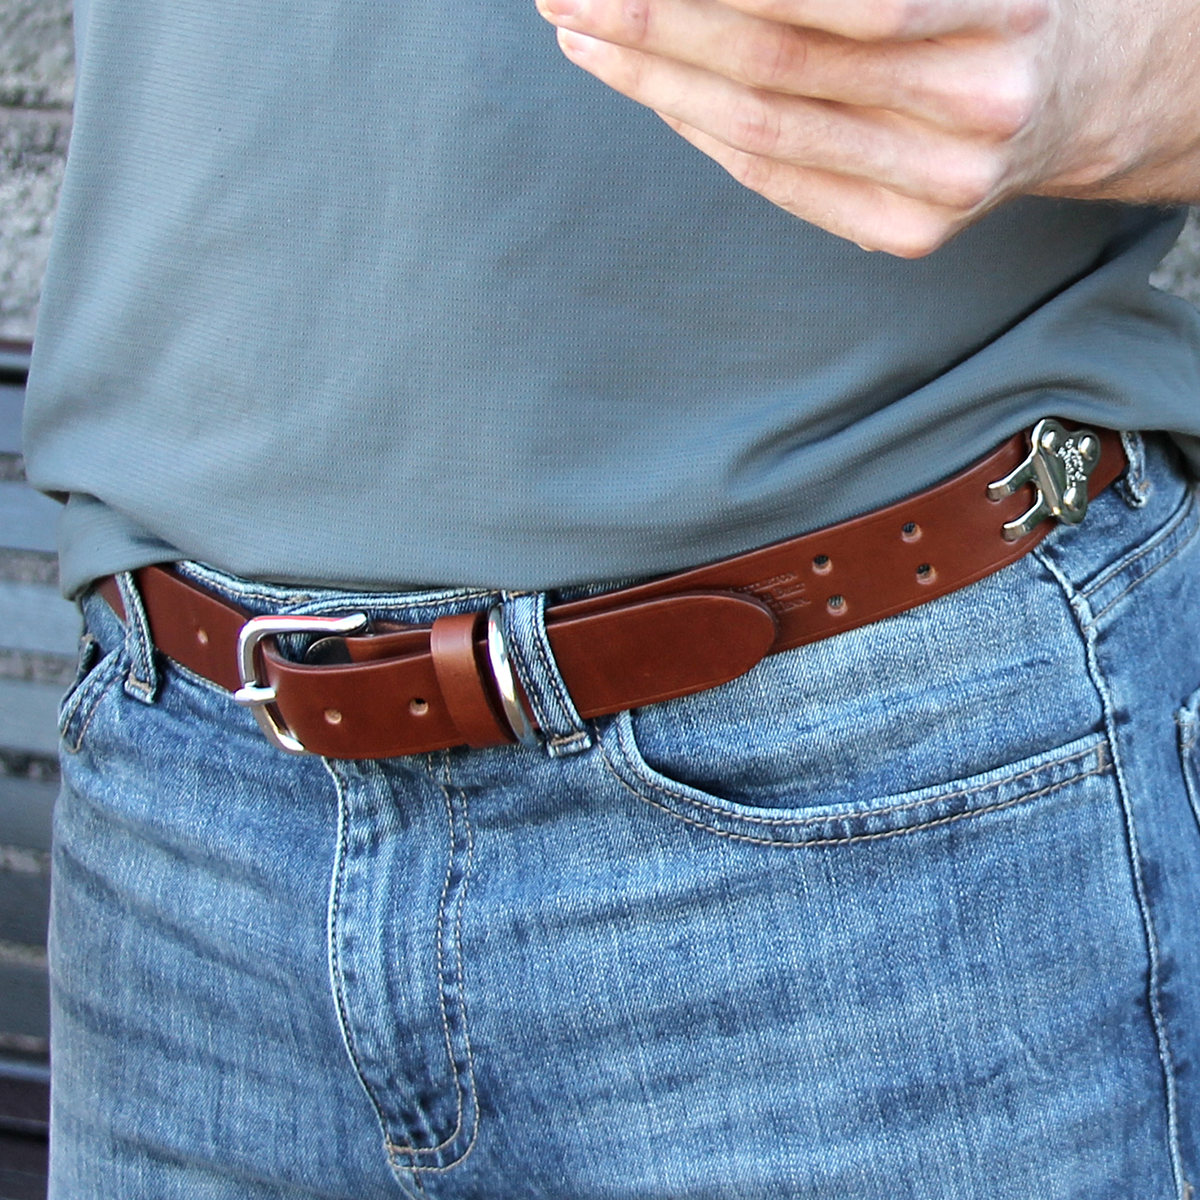 Adjustable Leather Belt, No. 1 - One Size Fits Most, USA Made | Col ...